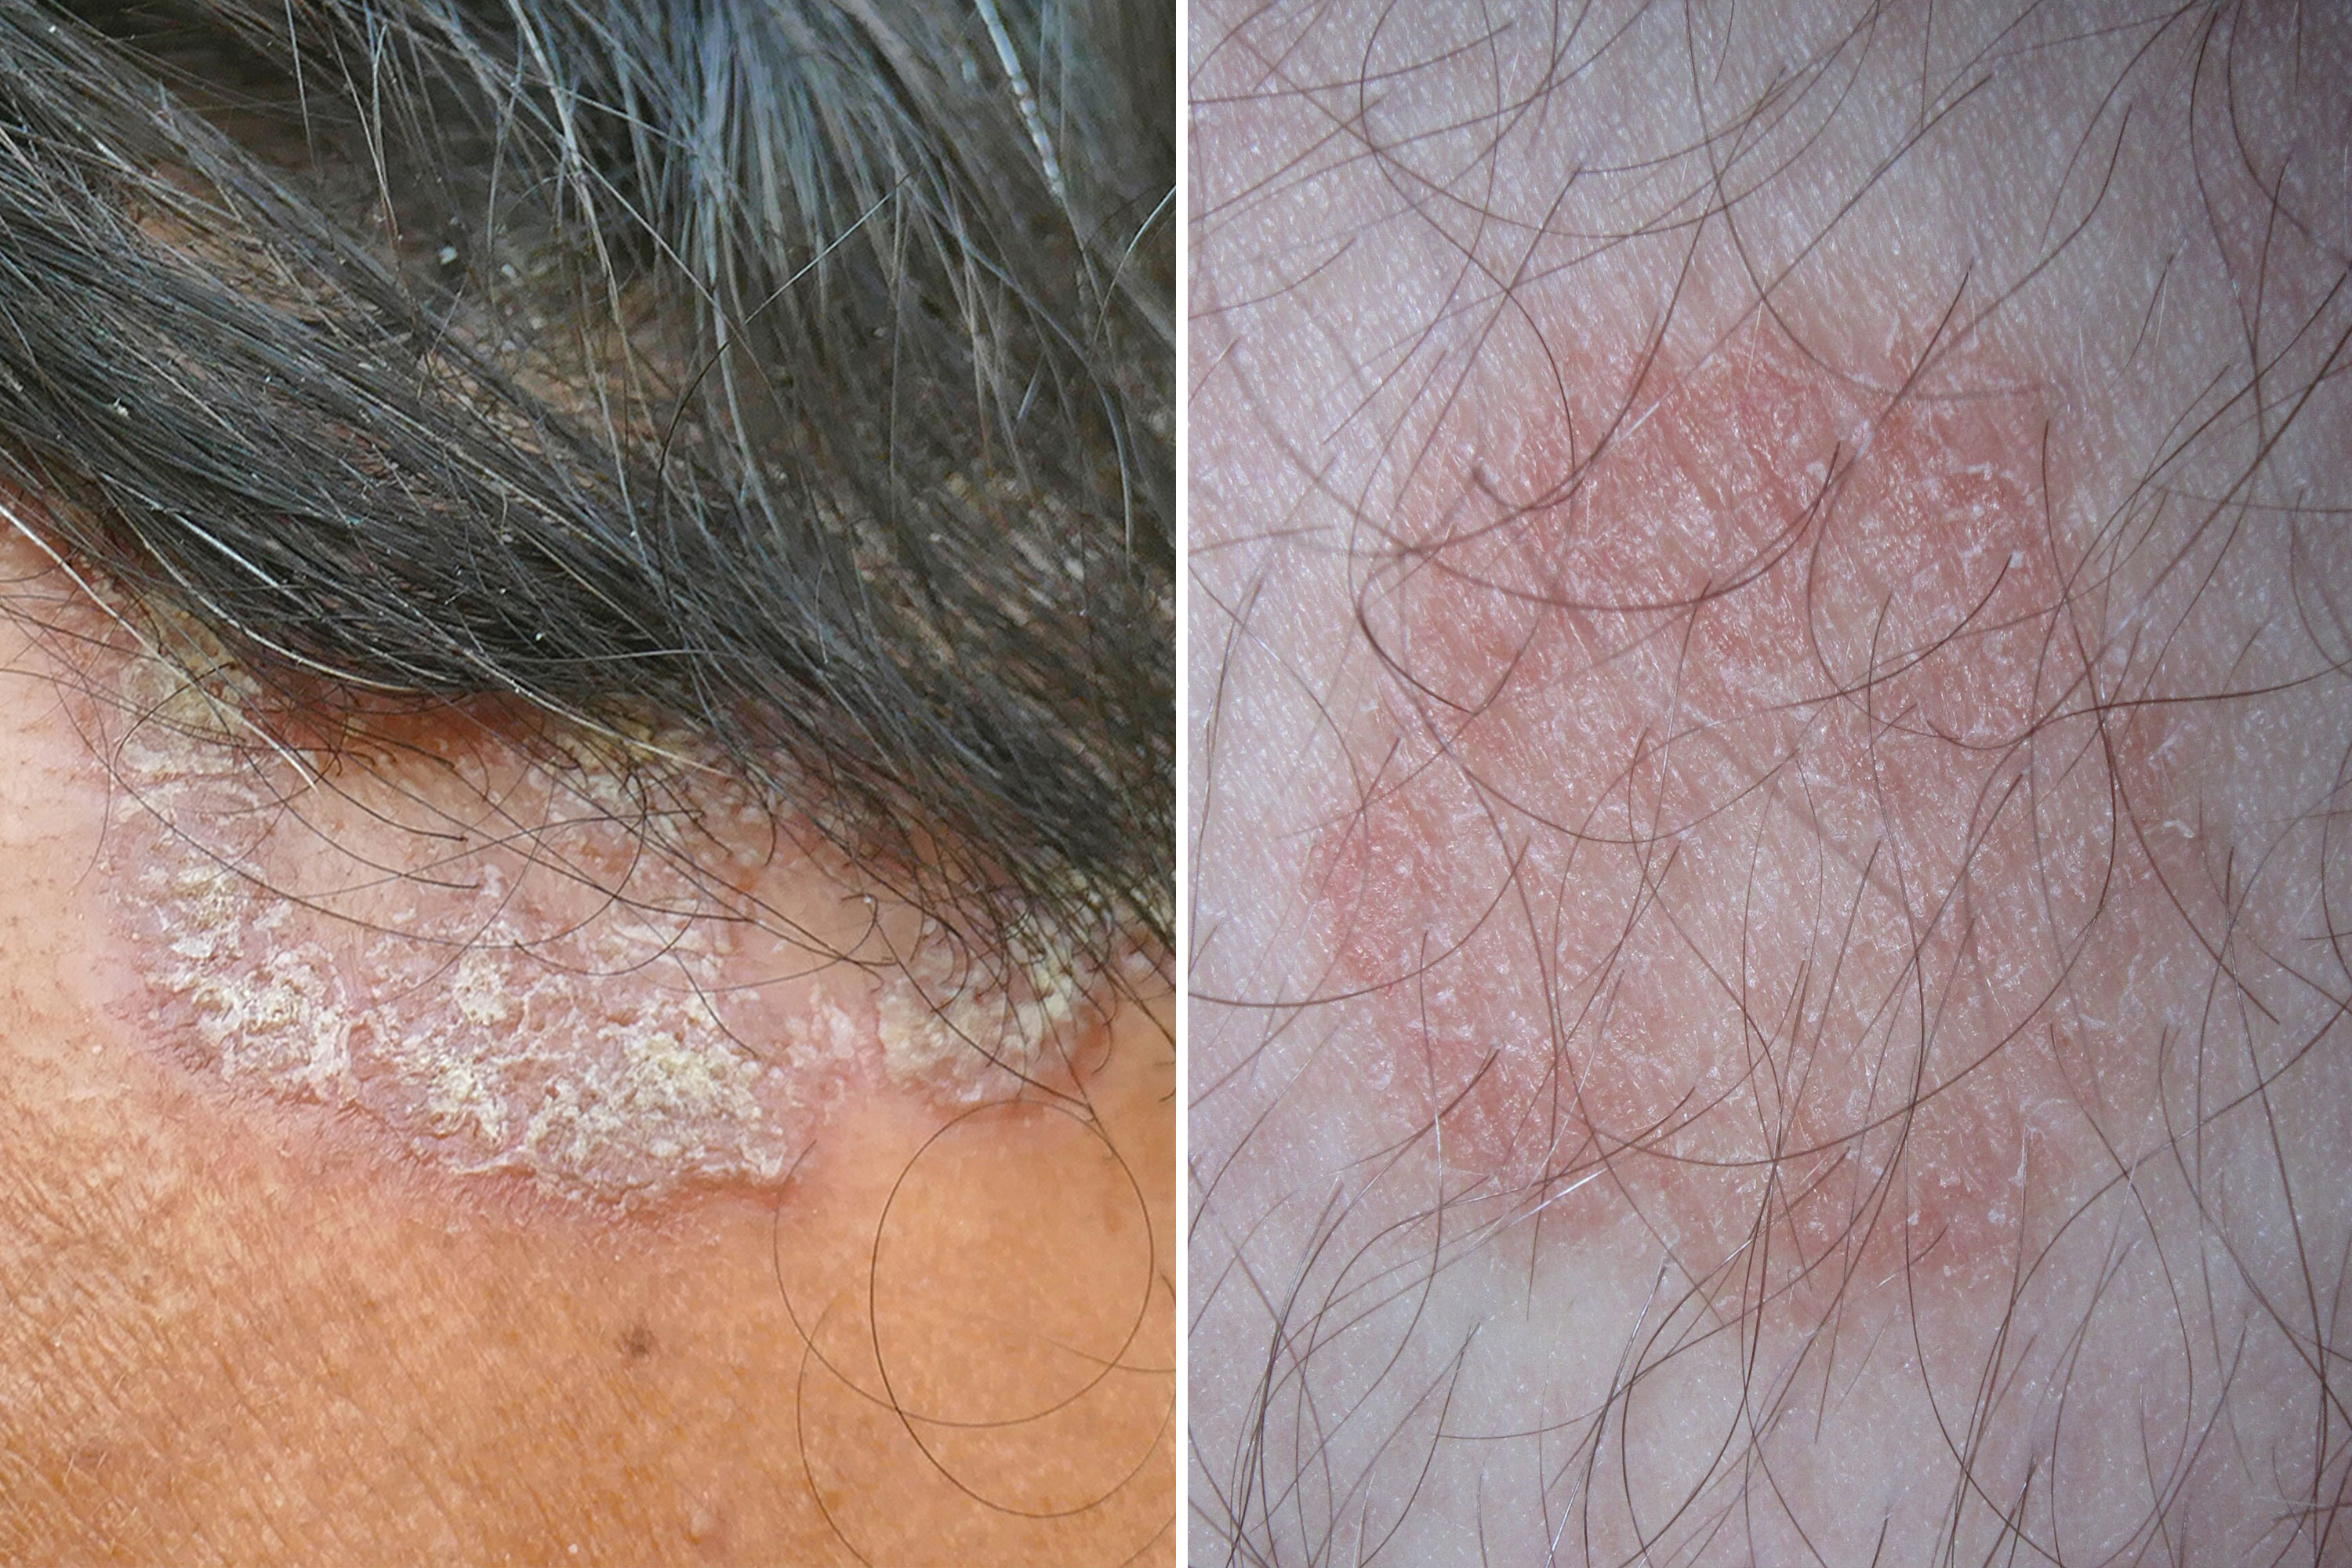 Causes of Scaly or Flaking Skin